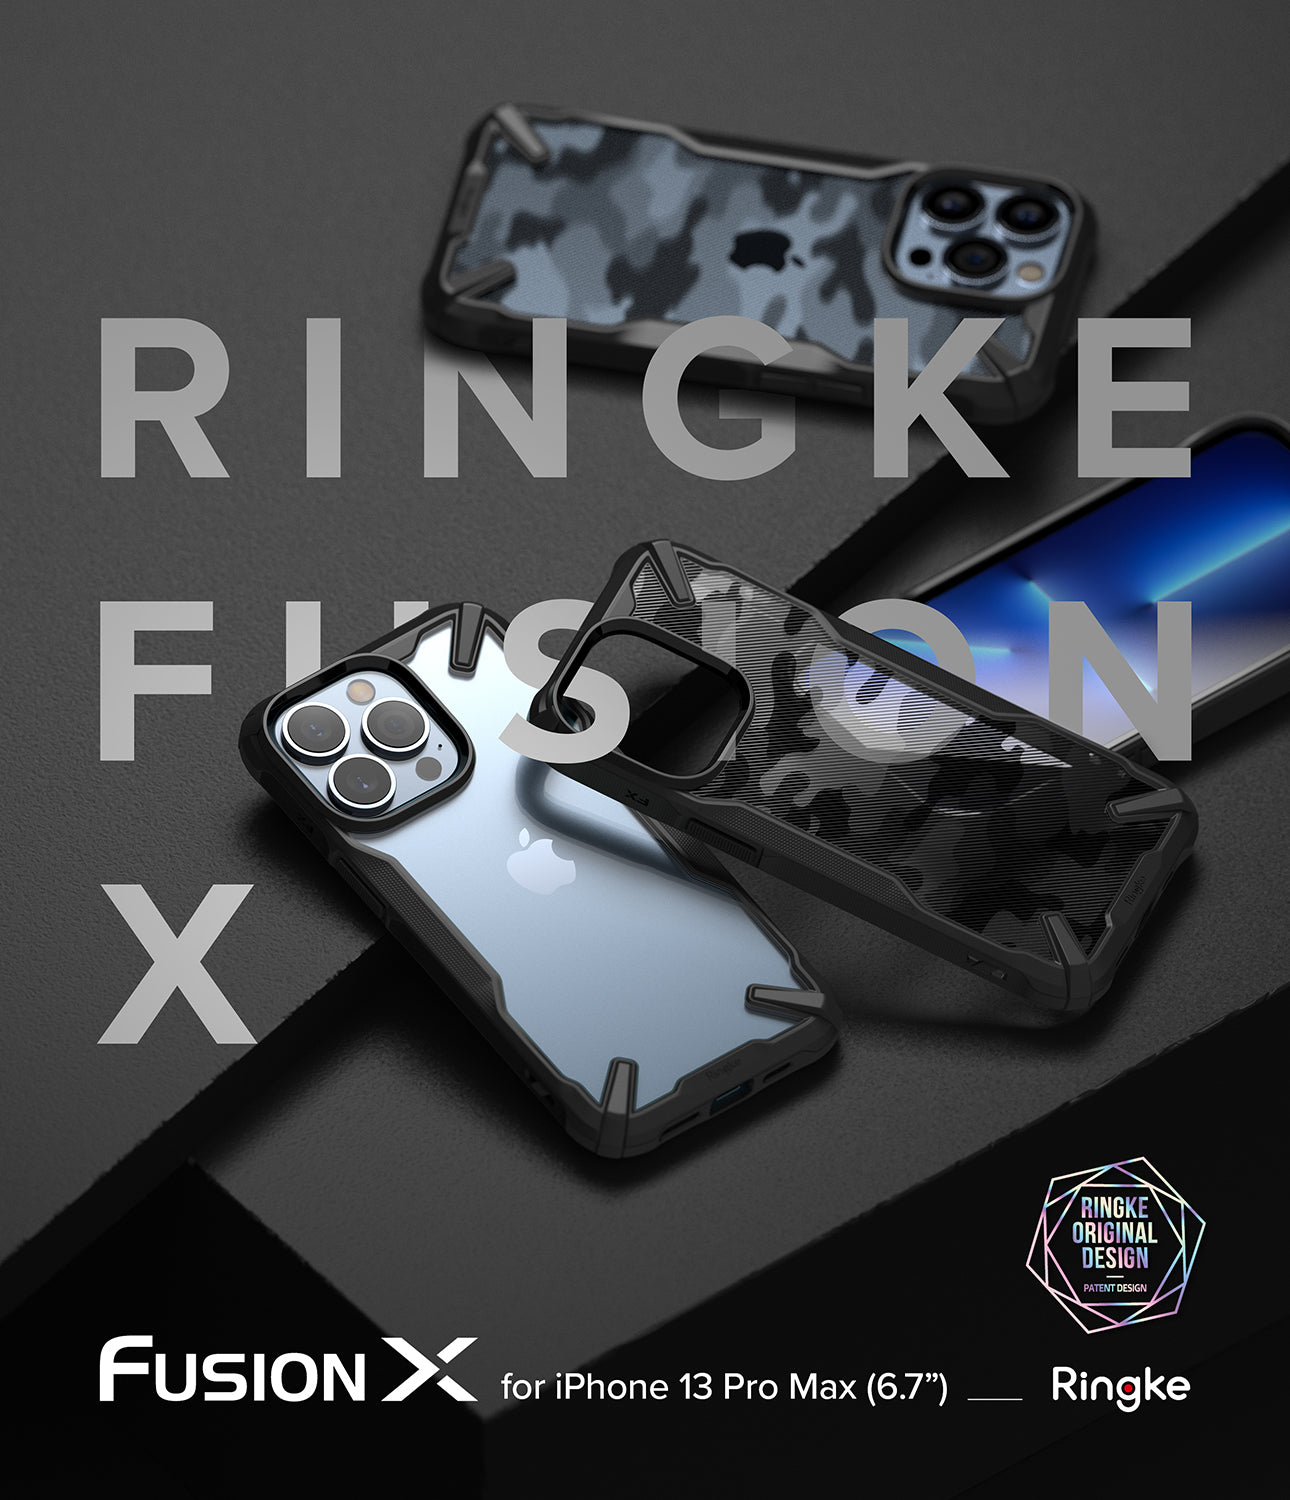 iPhone 13 Pro Max Case  Ringke Onyx Design – Ringke Official Store